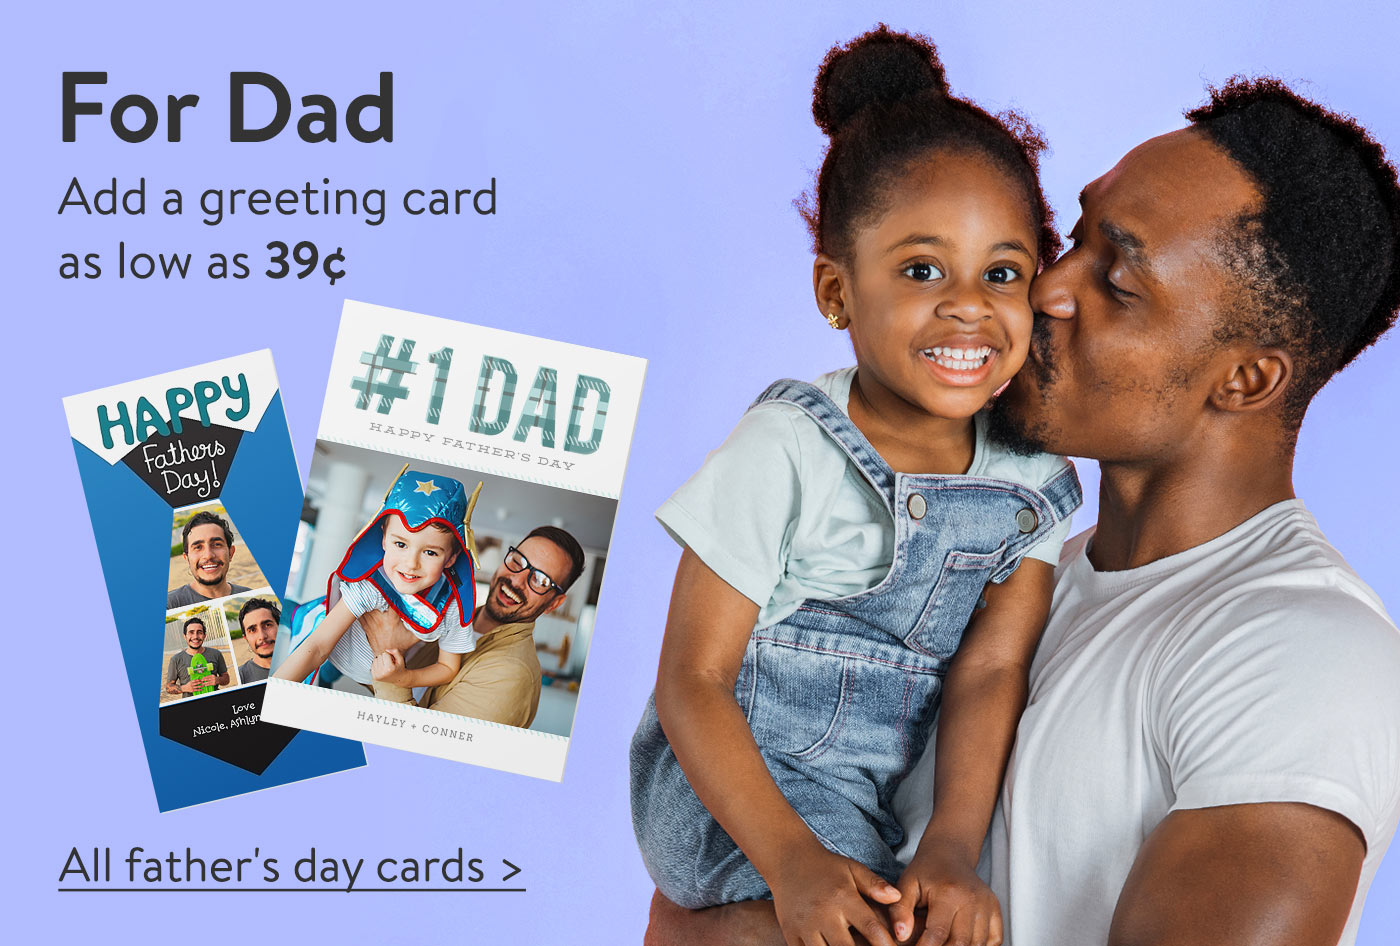 For Dad - Add a greeting card as low as 39